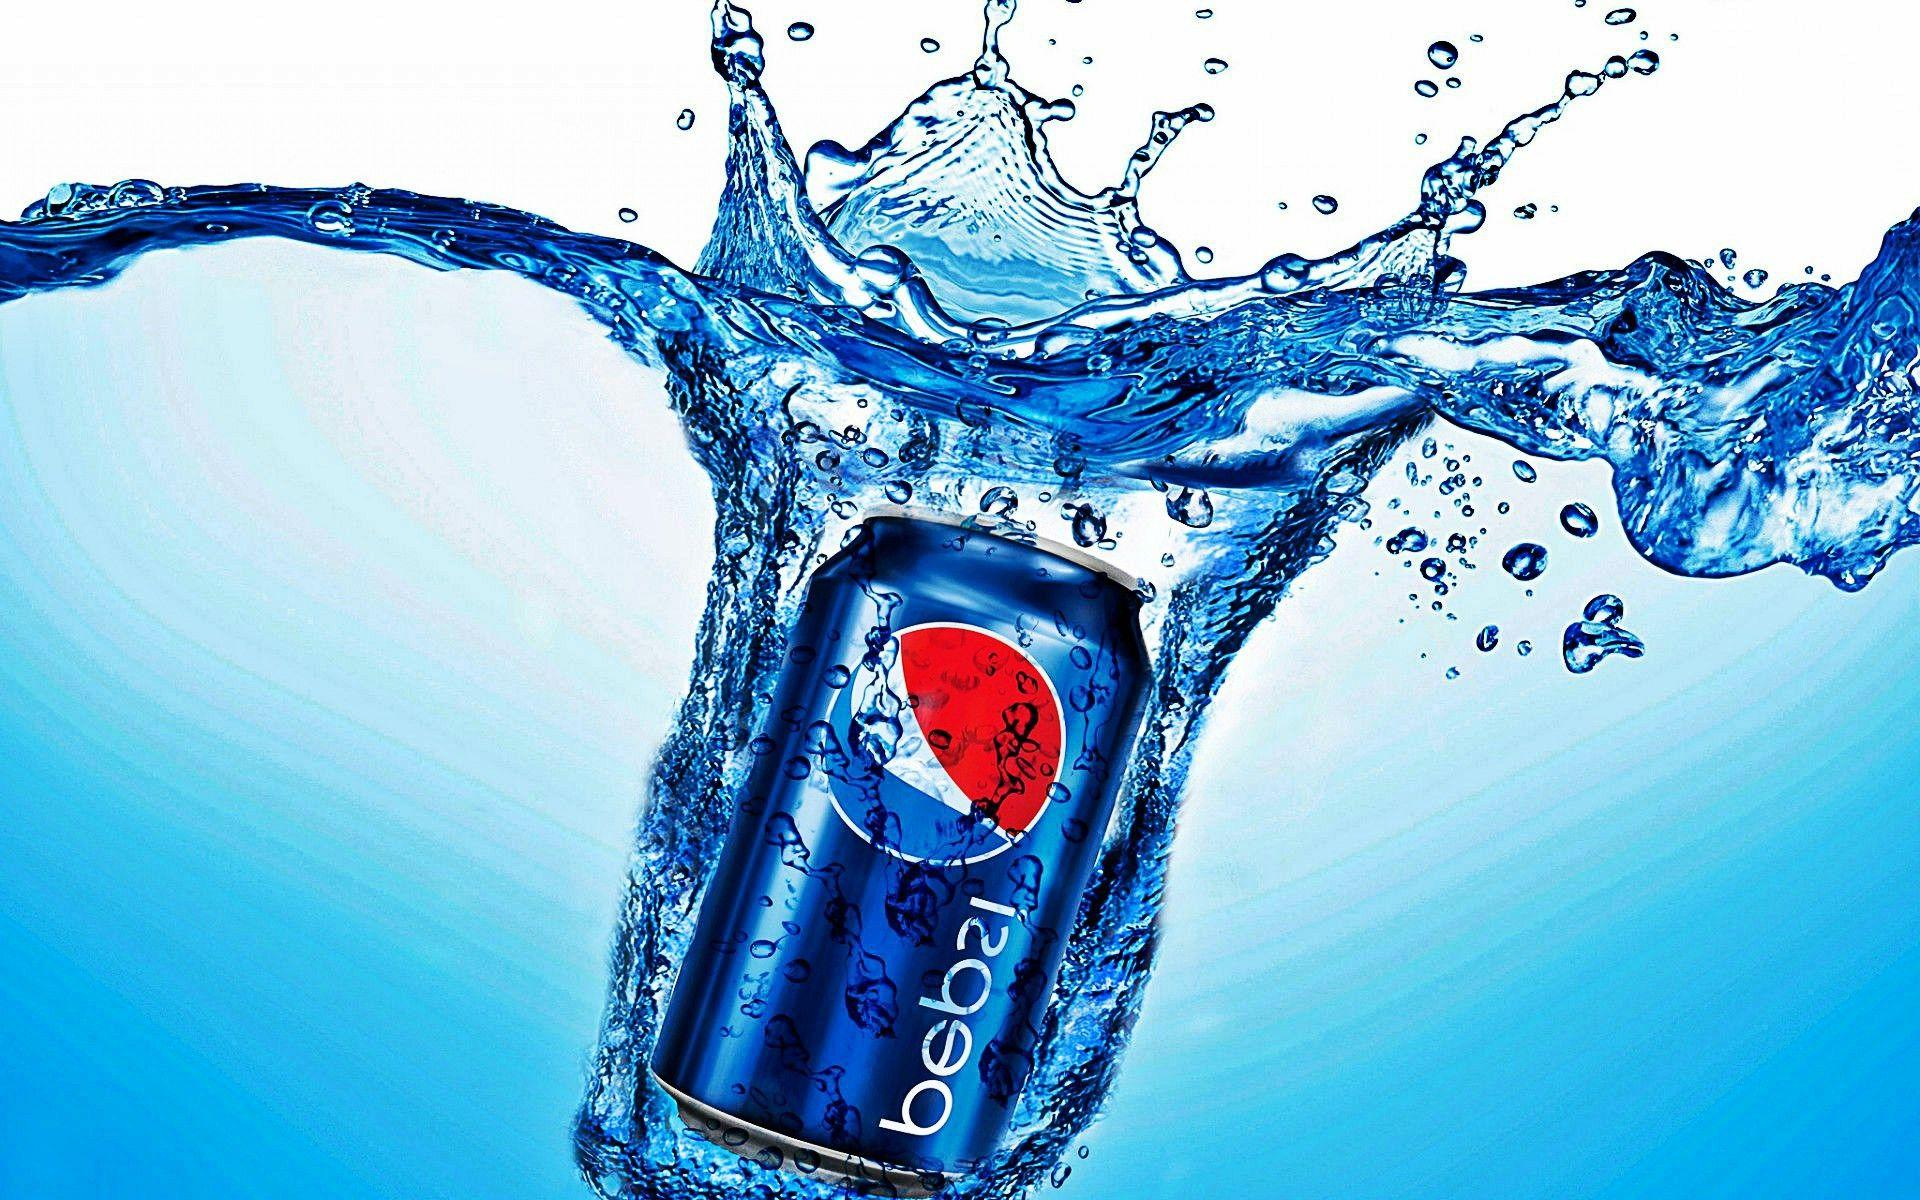 How Pepsi Slogans Connect with Generations over the Years